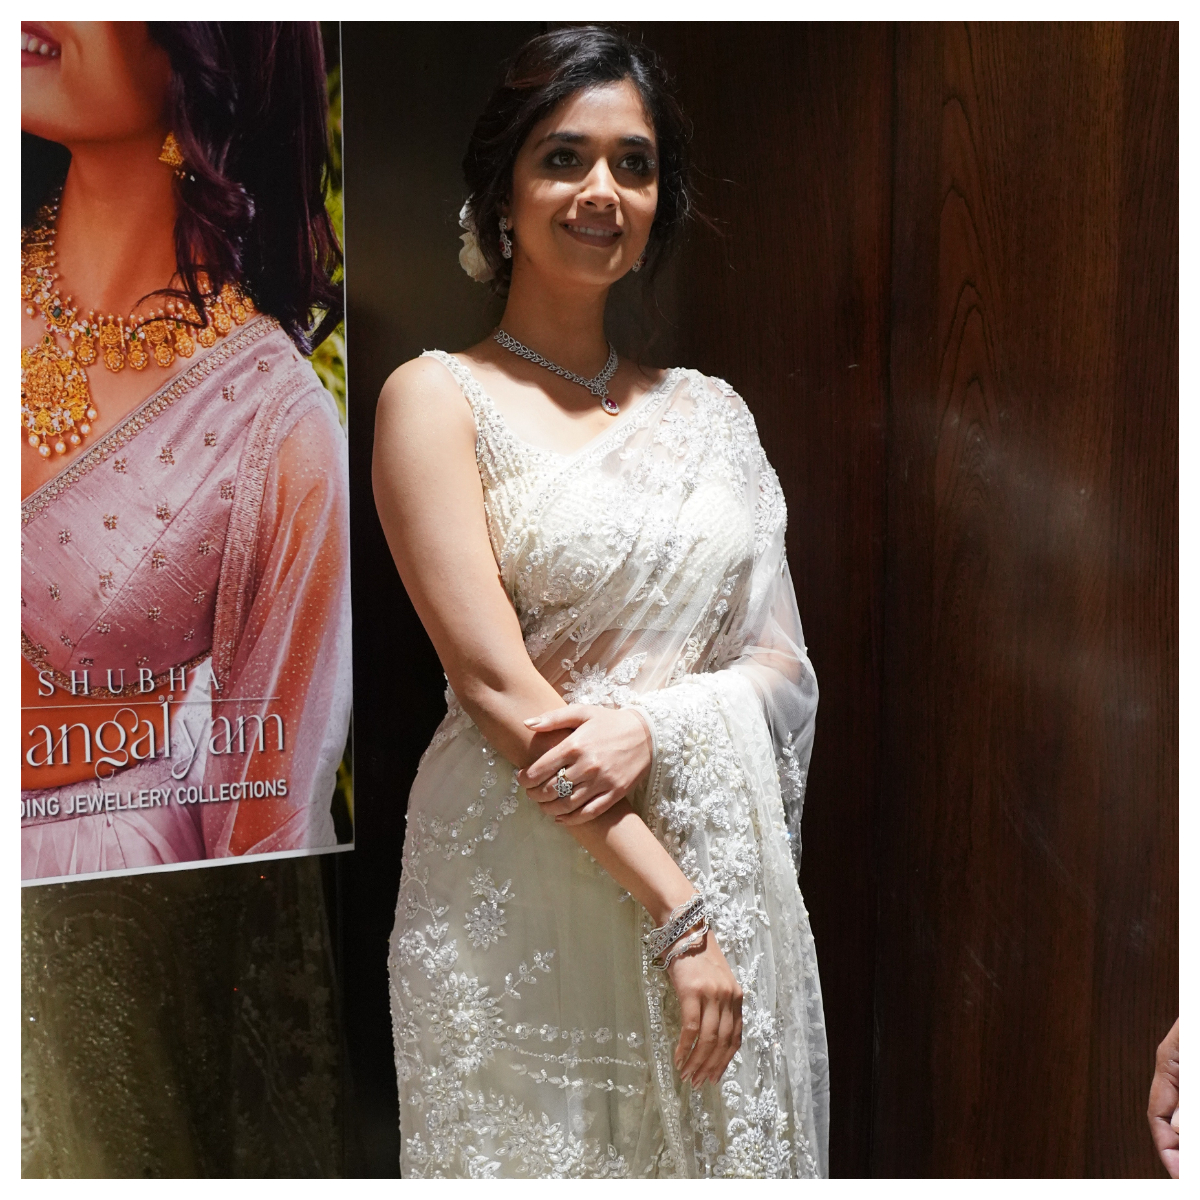 PICS: Keerthy Suresh looks resplendent in a white sheer organza saree as she waves at fans at an event